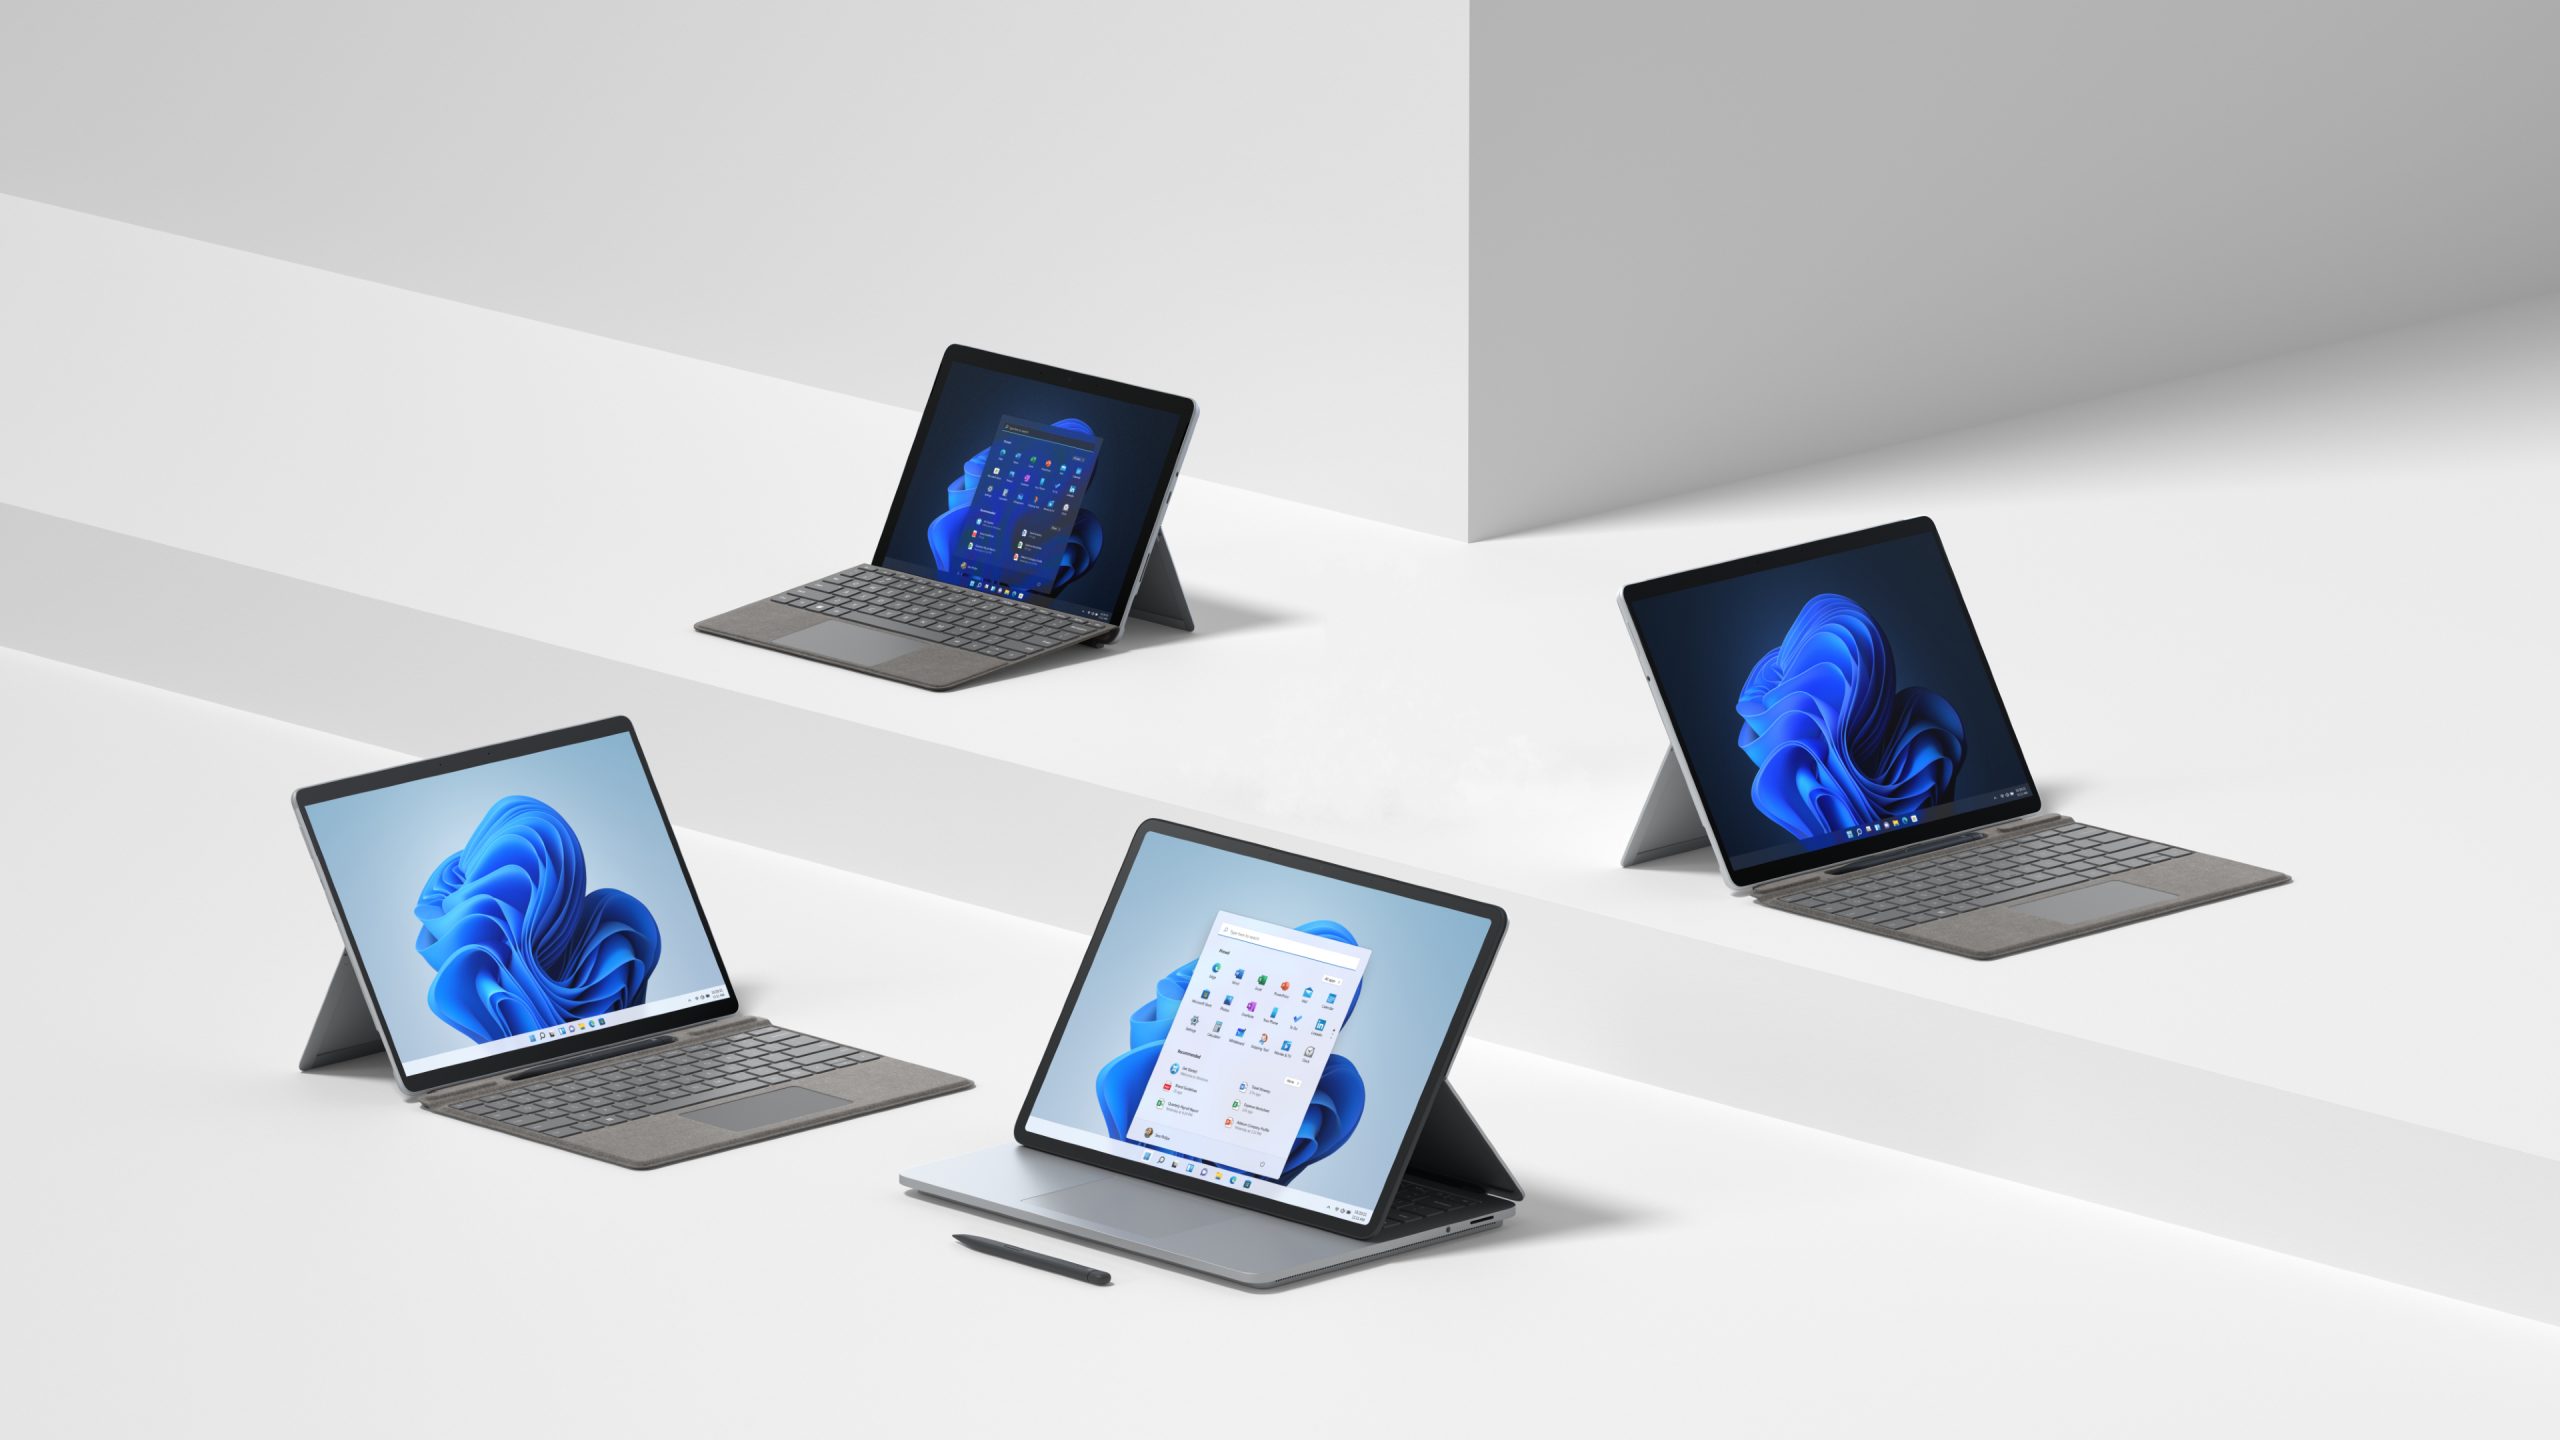 Introducing the latest Surface devices optimal for hybrid work: Surface Pro 8 and Surface Laptop Studio